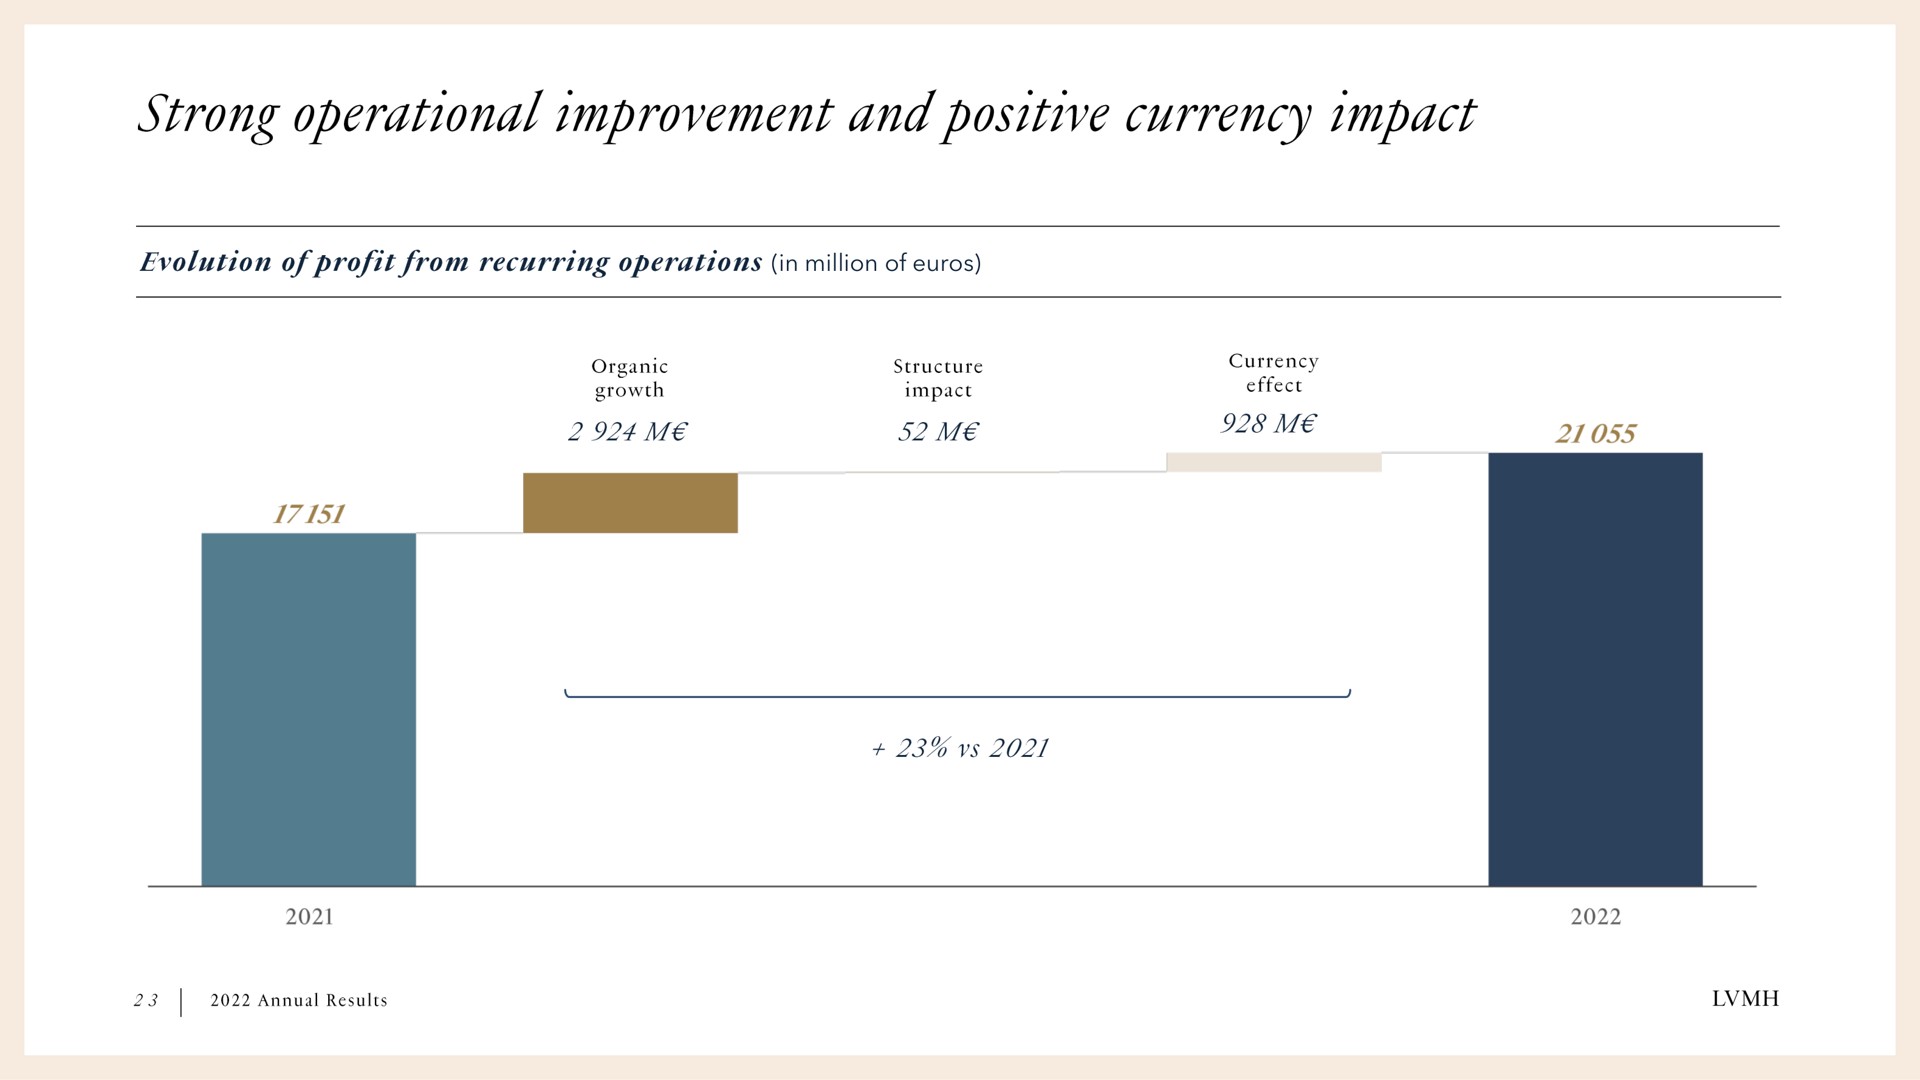 in million of strong operational improvement and positive currency impact | LVMH